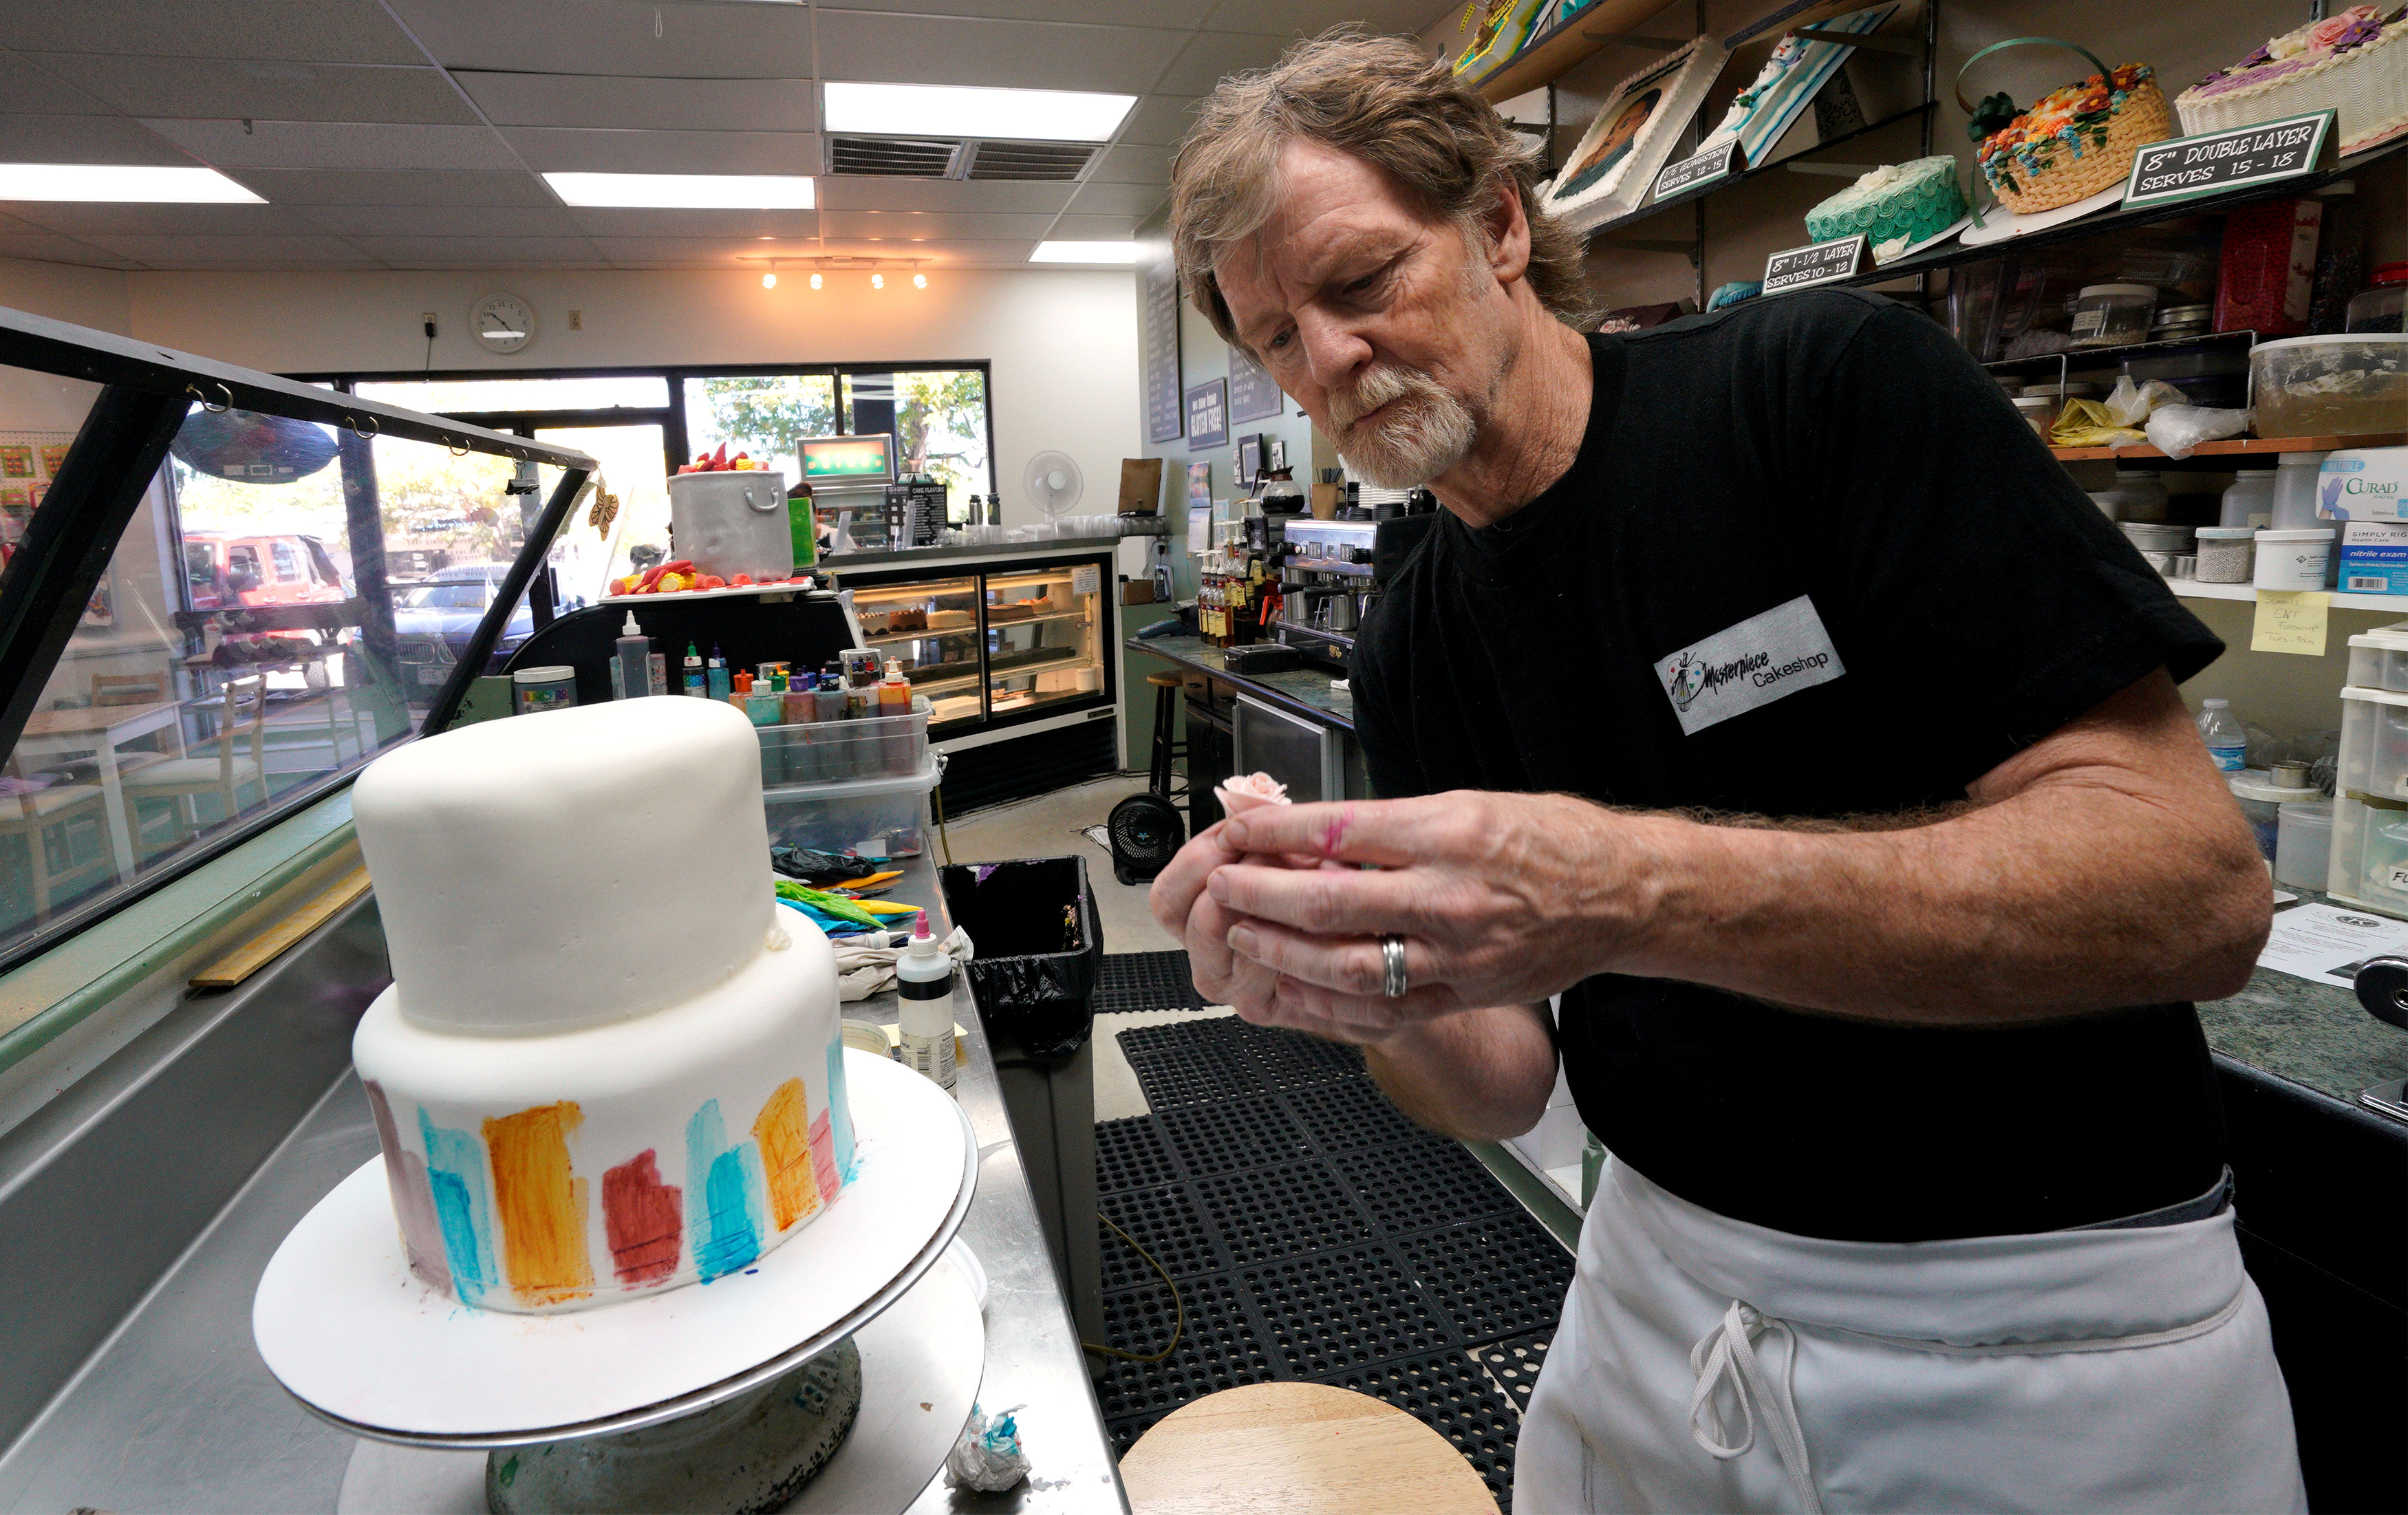 Court rules in favour of Christian baker 